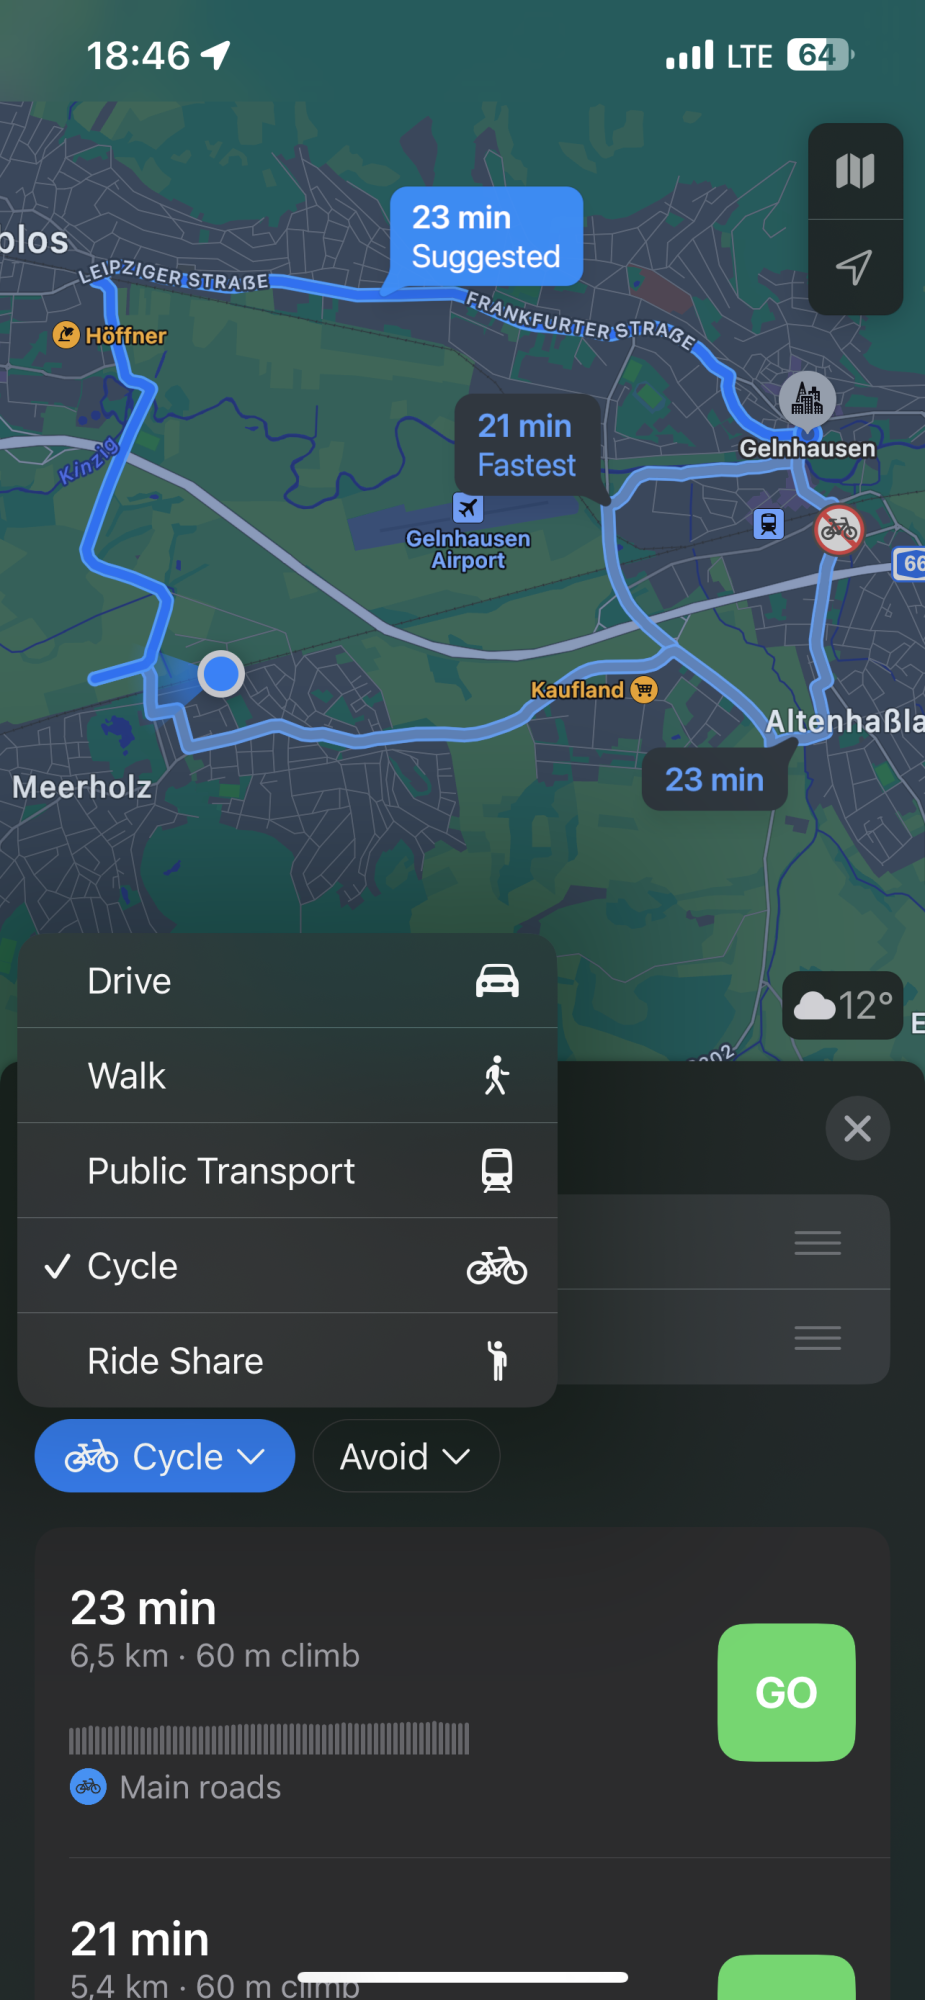 Apple Maps Now Offers Cycling Directions in Germany - MacRumors